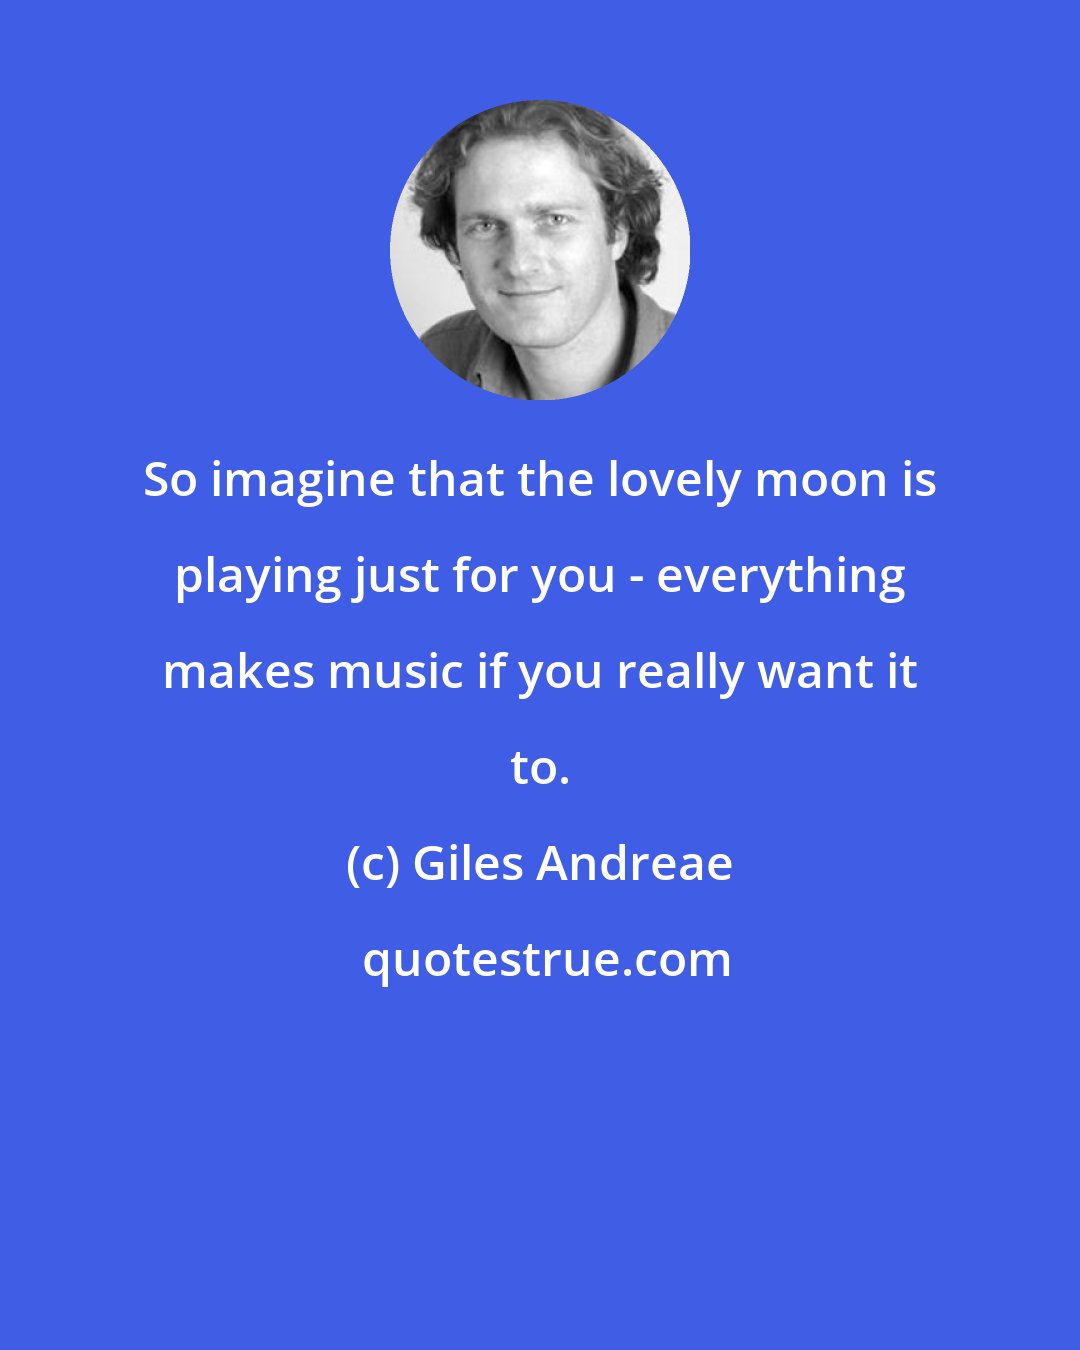 Giles Andreae: So imagine that the lovely moon is playing just for you - everything makes music if you really want it to.